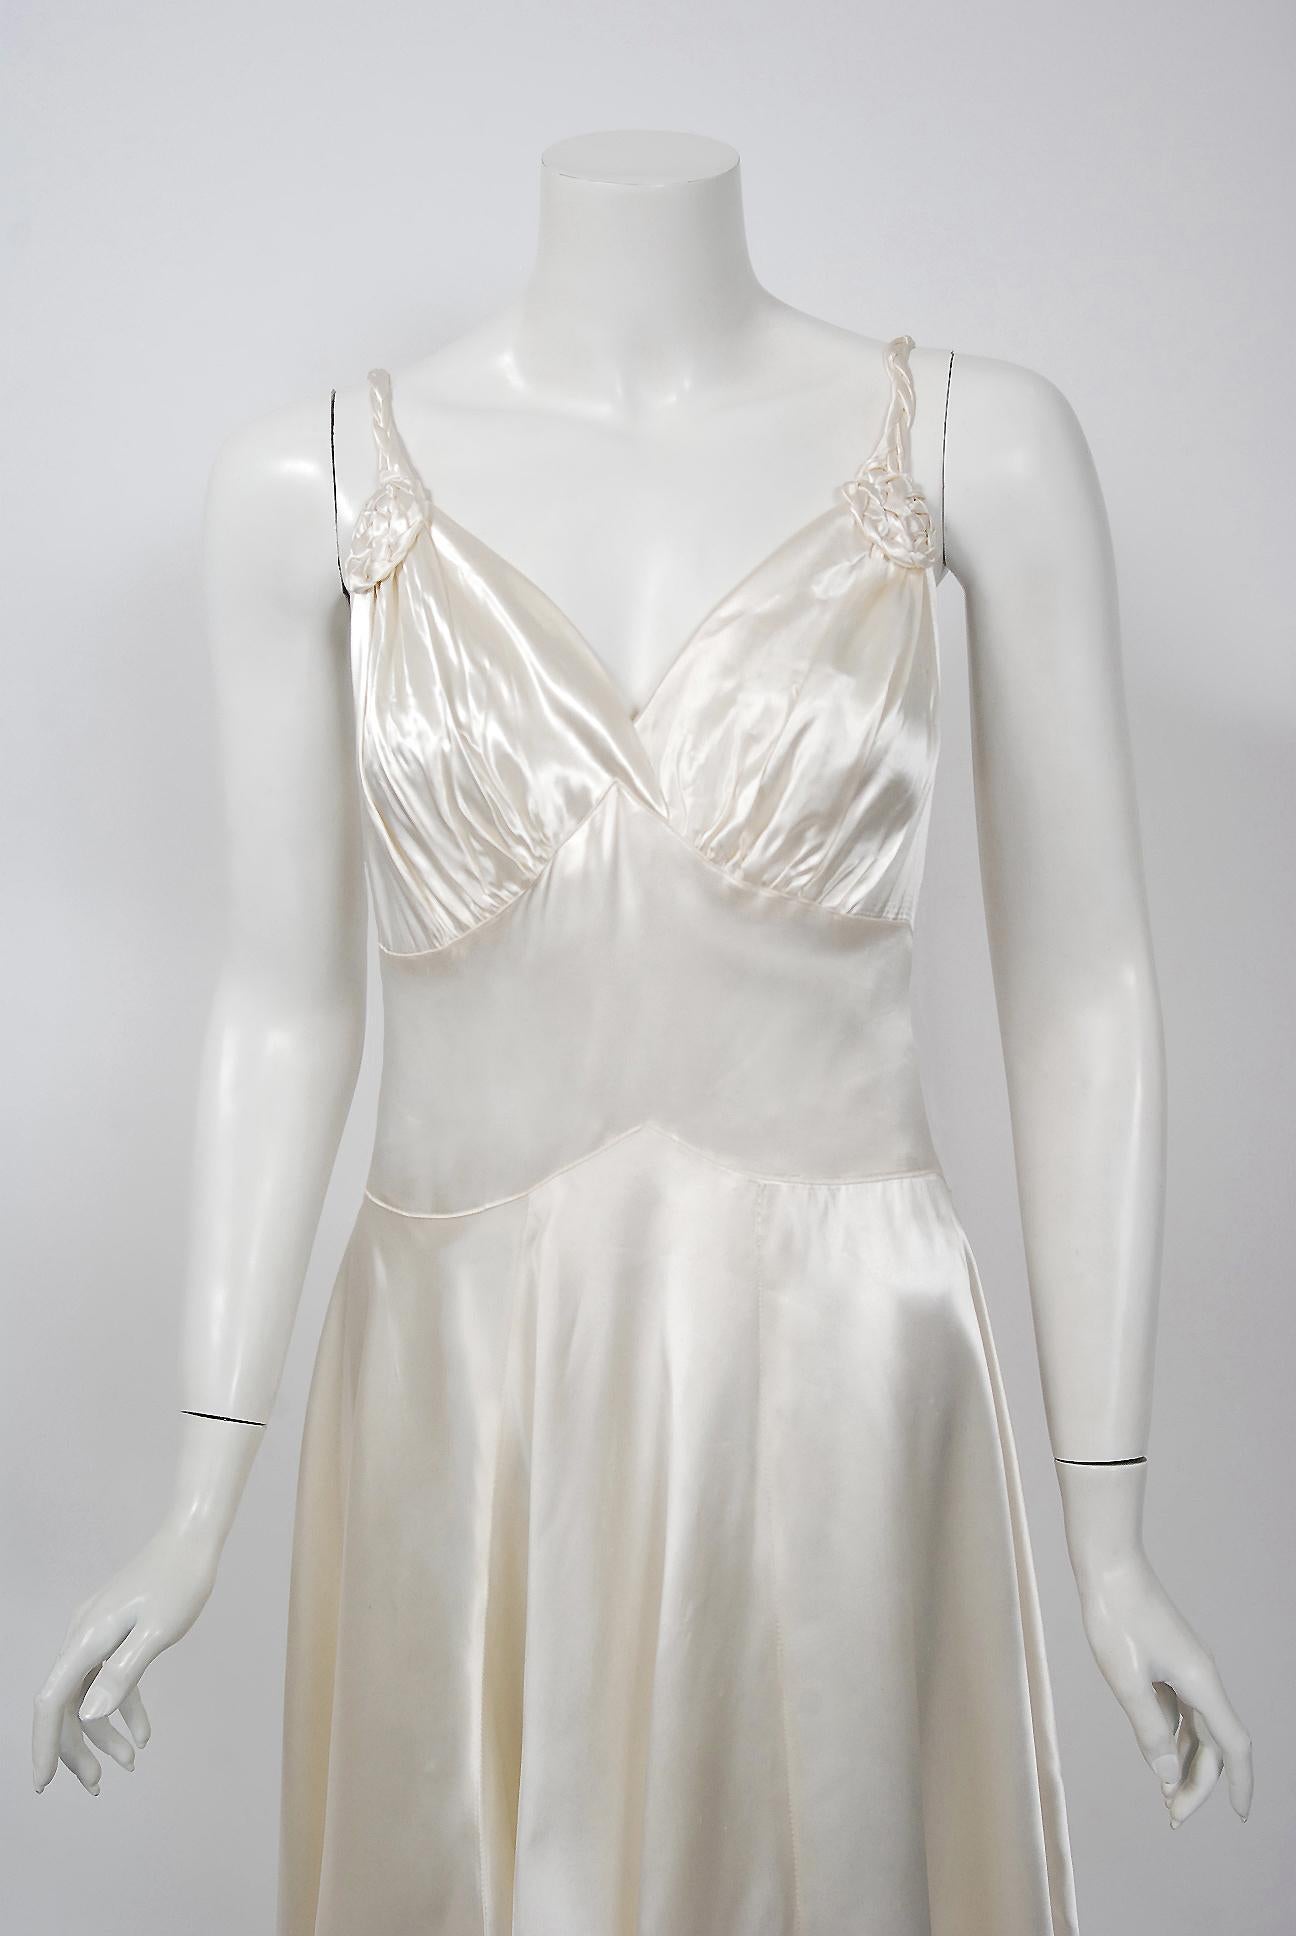 An elegant 1930's custom made ivory silk-satin slip dress from the Old Hollywood era of glamour. The bodice has a seductive low-cut sculpted plunge with detailed rosette appliques. The thin braided straps and back covered buttons add the perfect